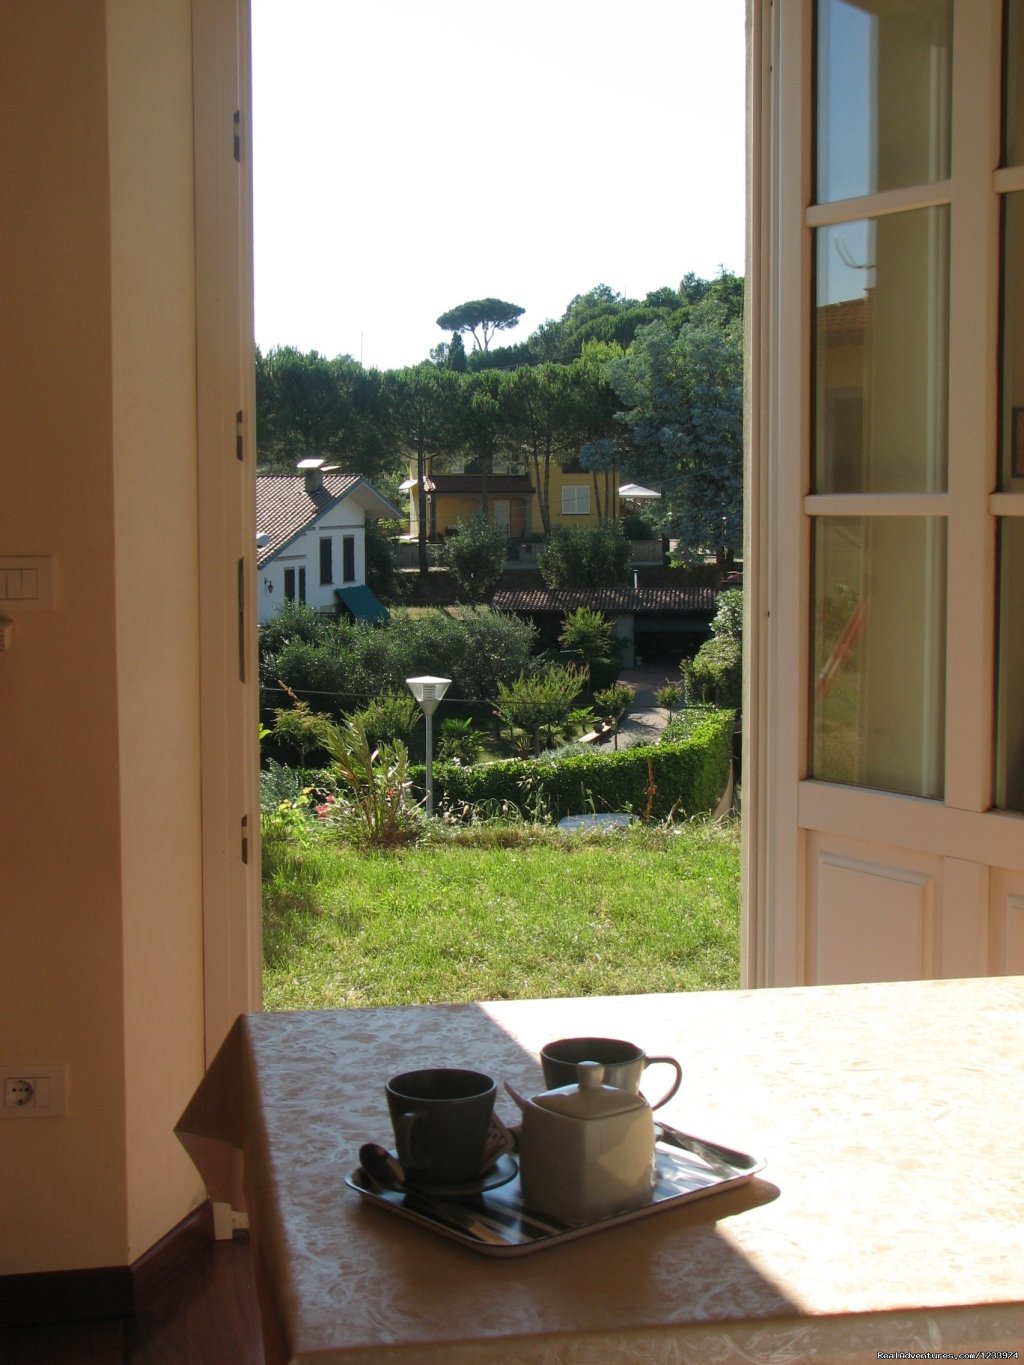 B&b Colle del lupo | pescia, Italy | Bed & Breakfasts | Image #1/7 | 